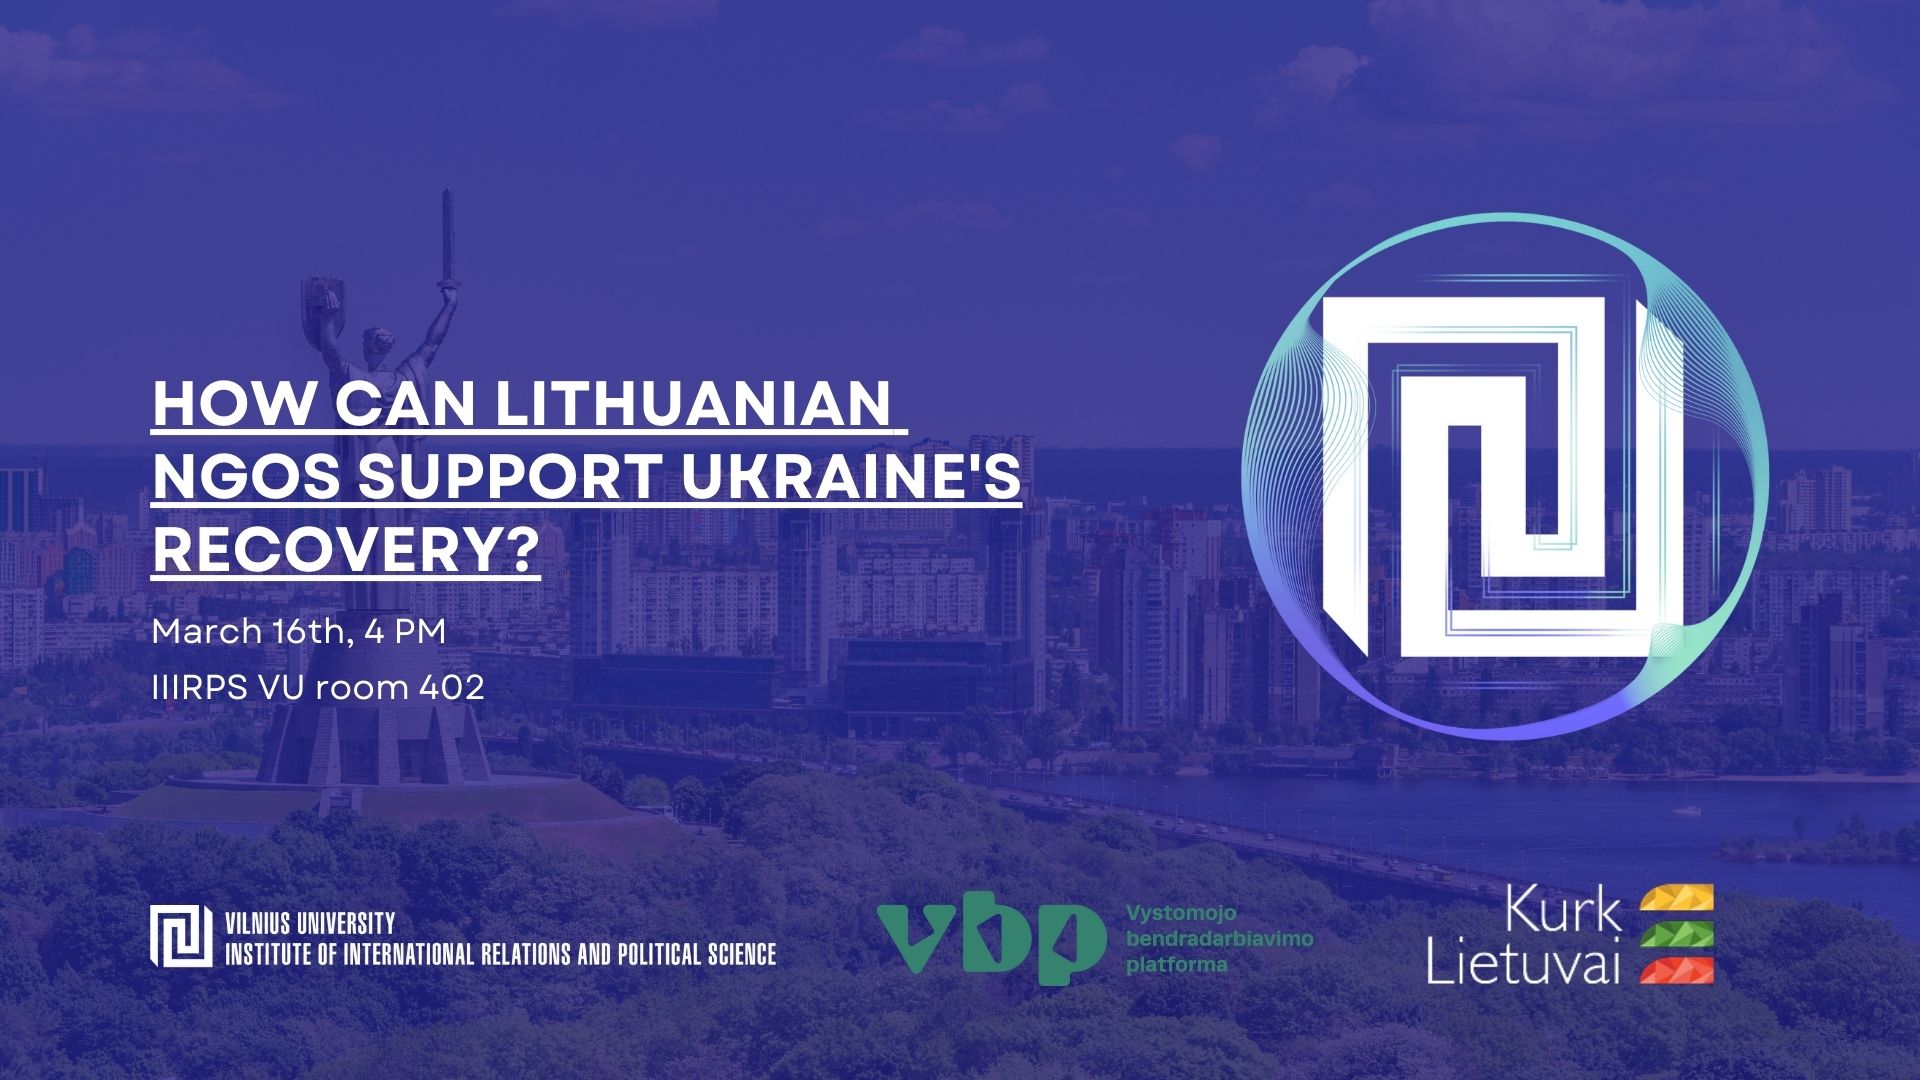 „How can Lithuanian NGOs support Ukraine’s recovery?“